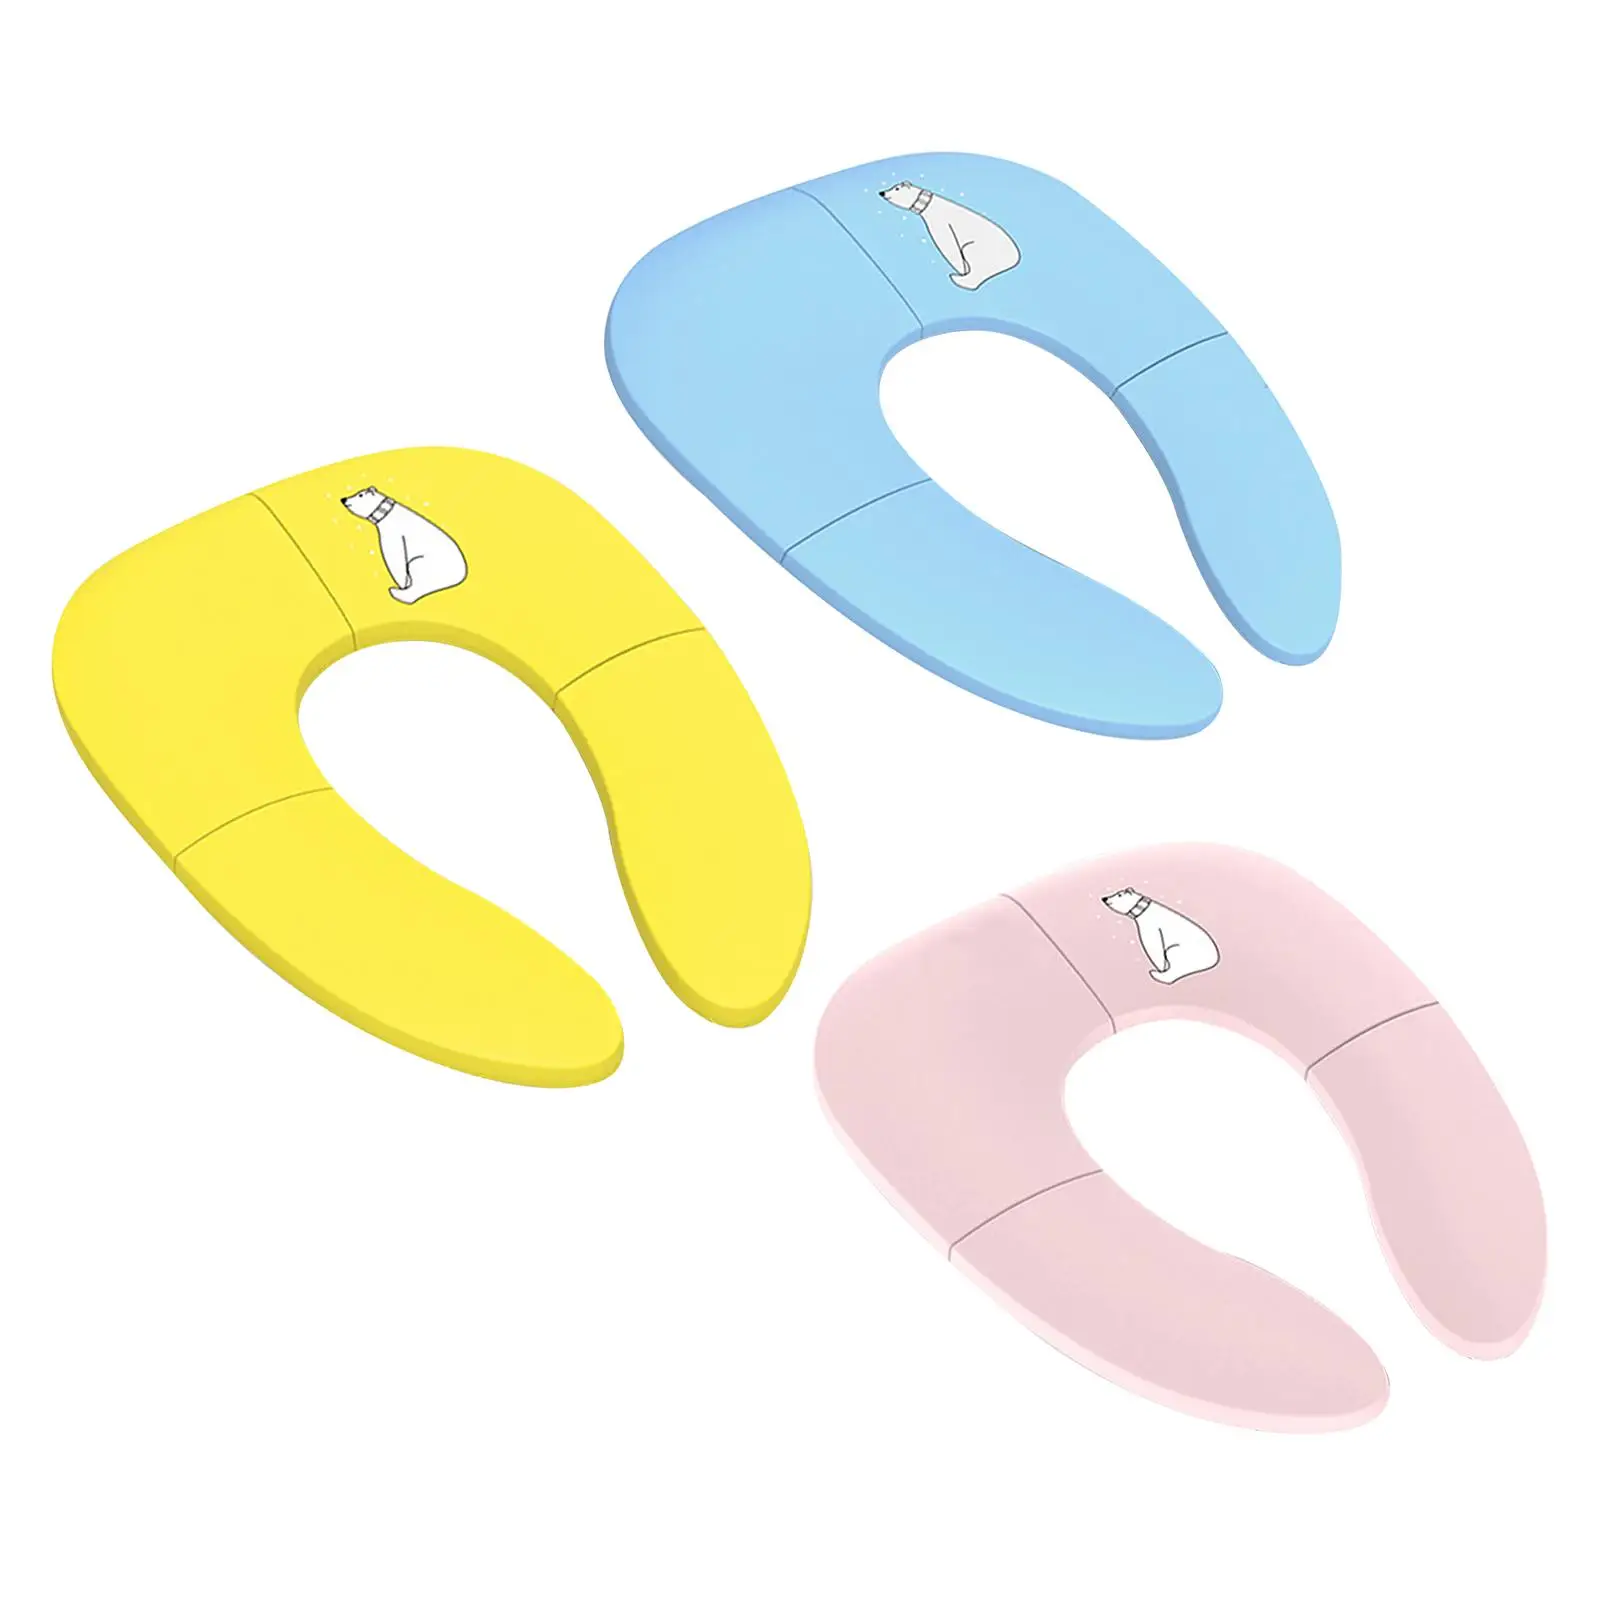 Foldable Toilet Cover Reusable Portable Non Slip Toilet Seat pad Toilet Cushion for Round and Oval Toilets Home Use Girls Boys